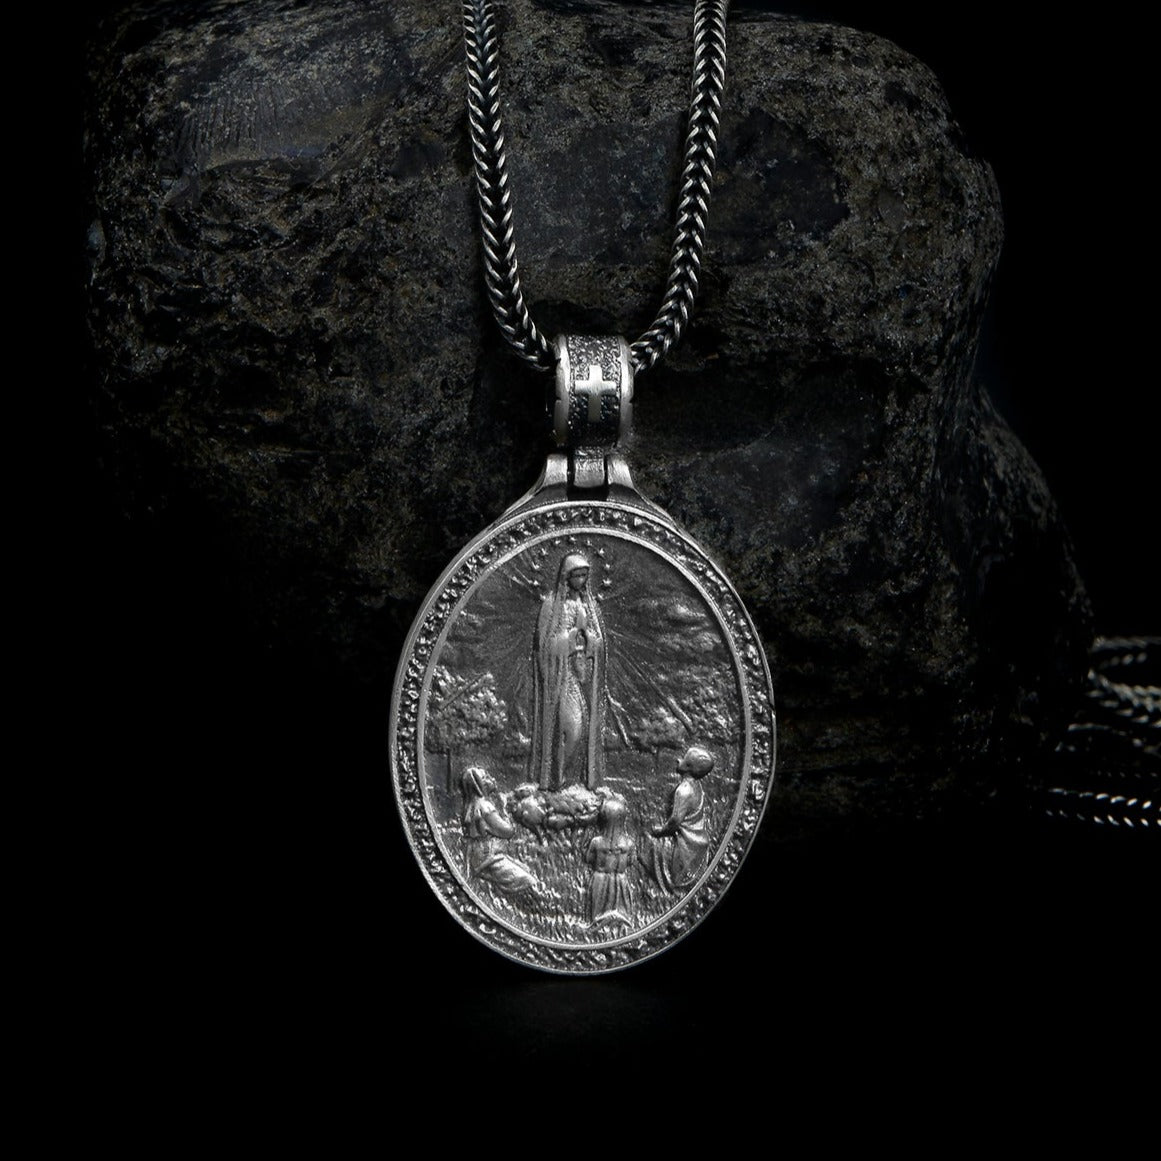  Detailed Sterling Silver Virgin Mary pendant hanging gracefully on a delicate chain, symbolizing purity and divine motherhood.